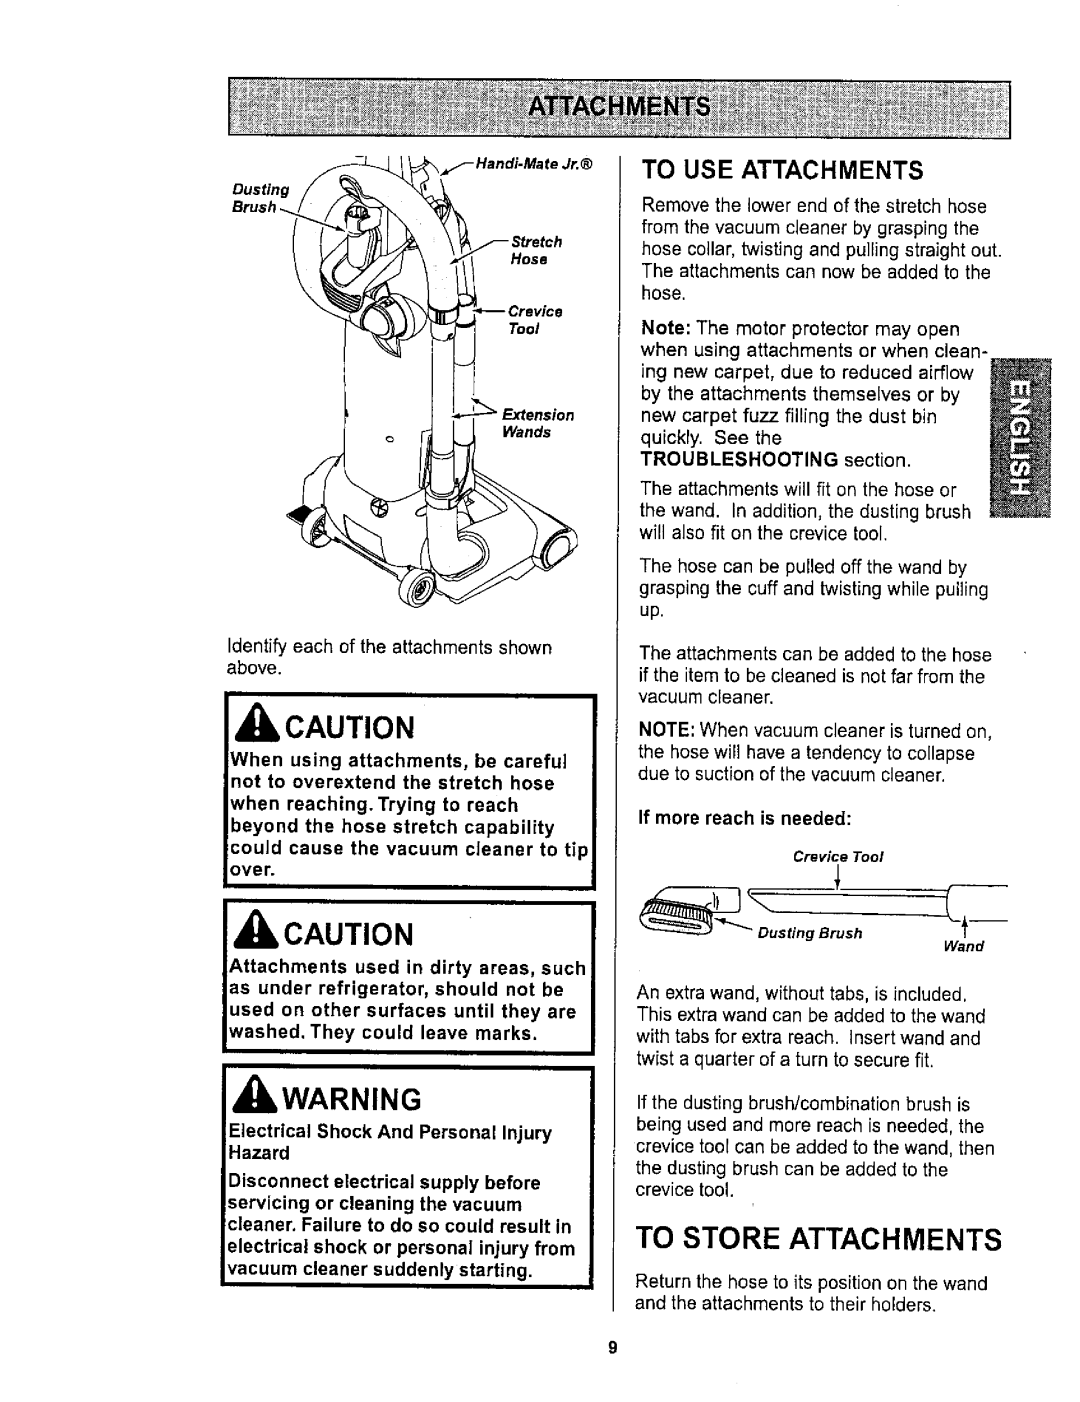 Kenmore 116.36722 IbCAUTION, To Store Attachments, To Use Attachments, could cause the vacuum cleaner to tip over 